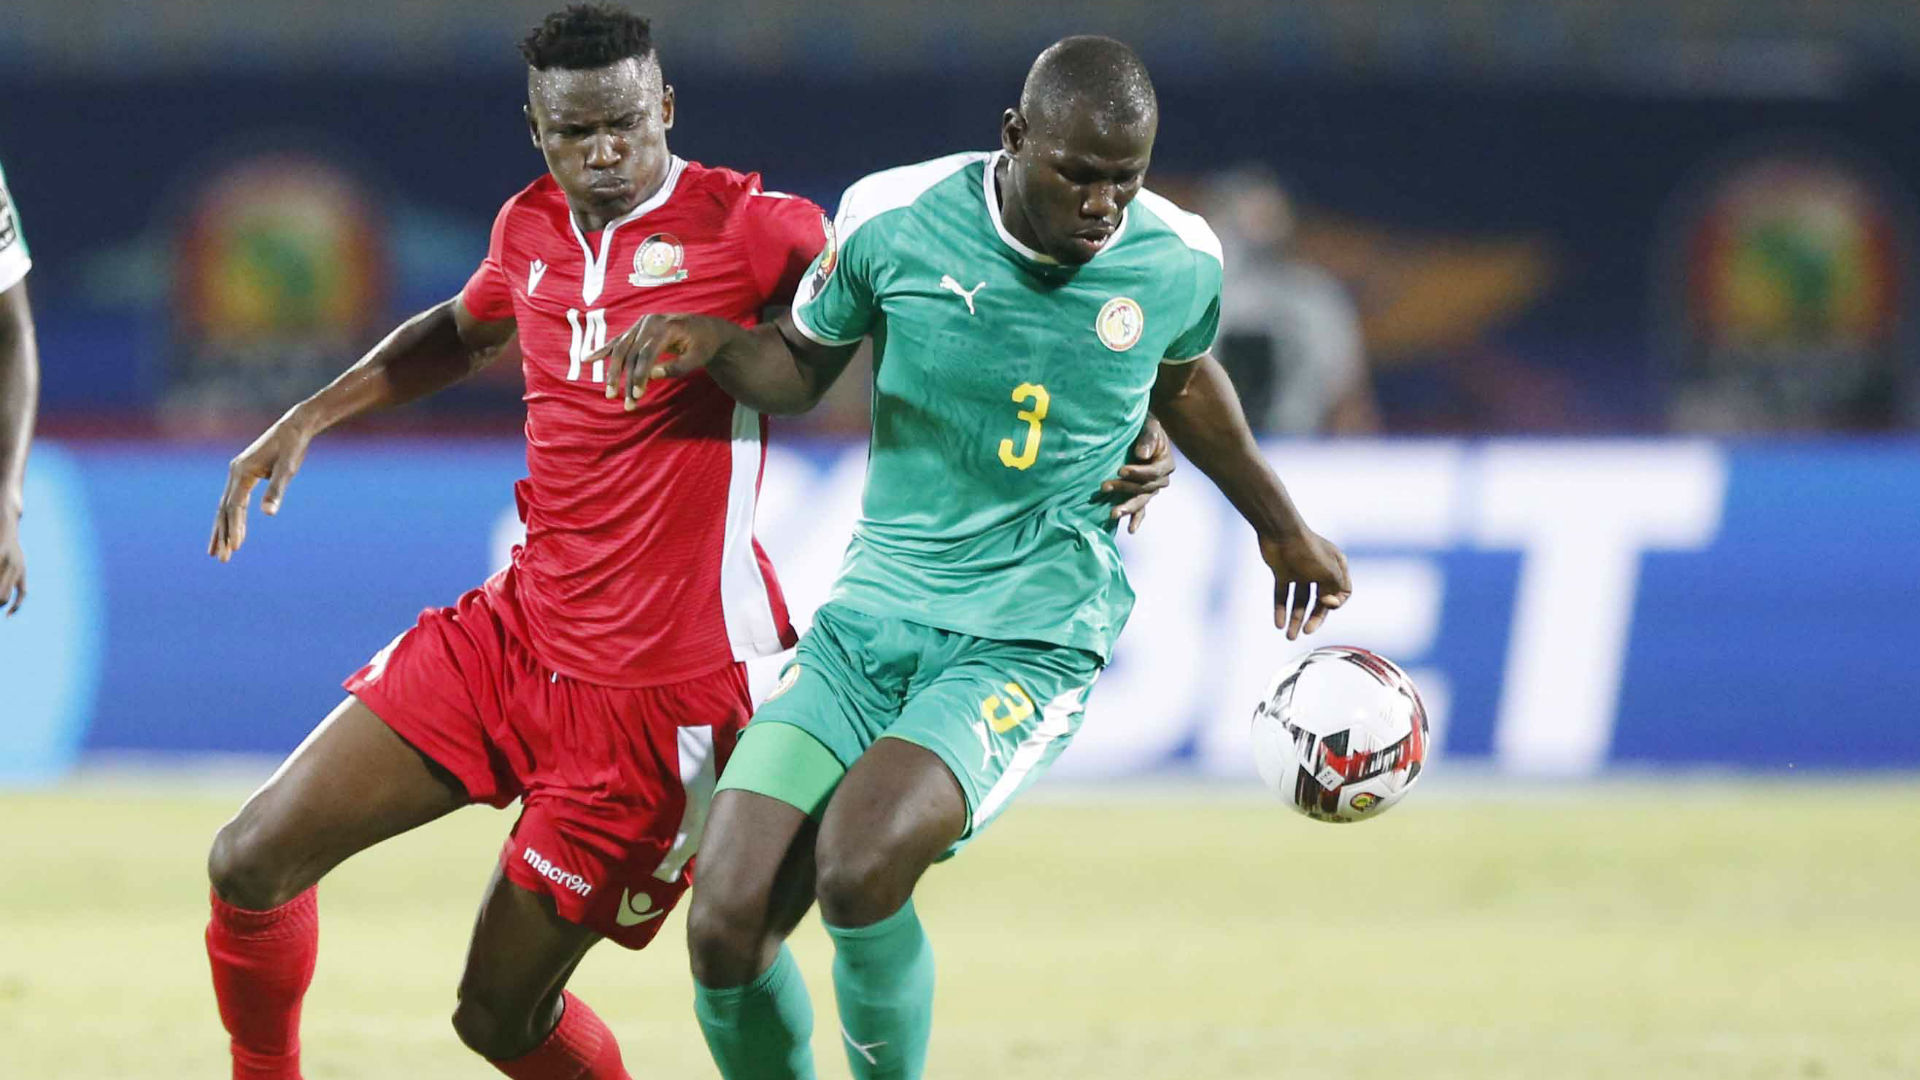 Afcon 2019: What Kenya learnt from defeat against Senegal